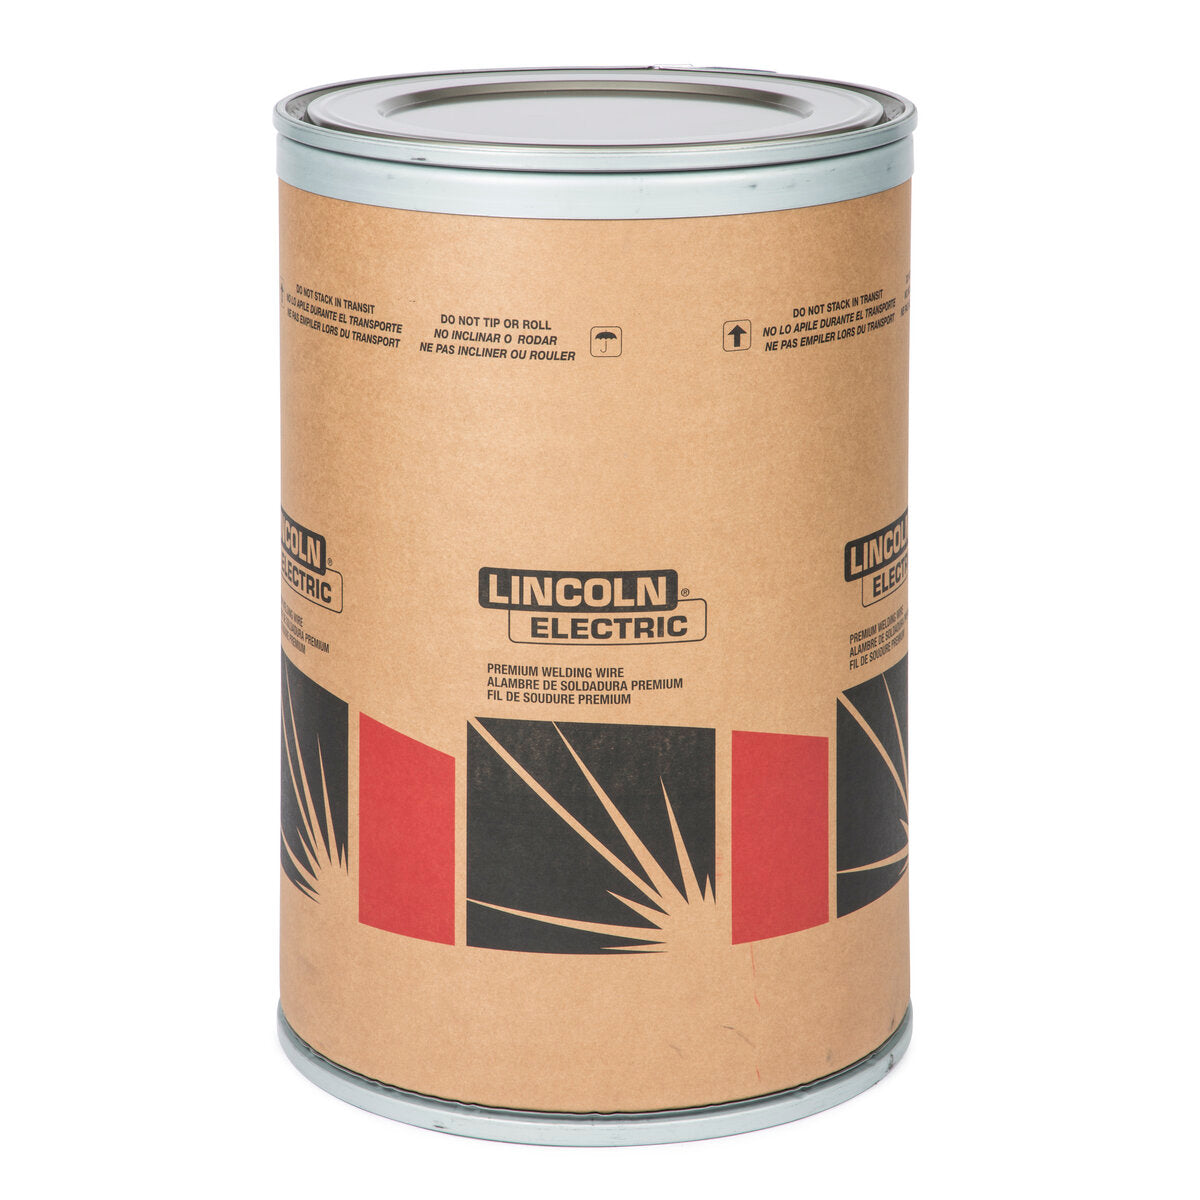 Lincoln Electric - Techalloy® 625 Submerged Arc (SAW) Wire, 3/32 in, 500 lb Speed Feed® Drum - SA625093692